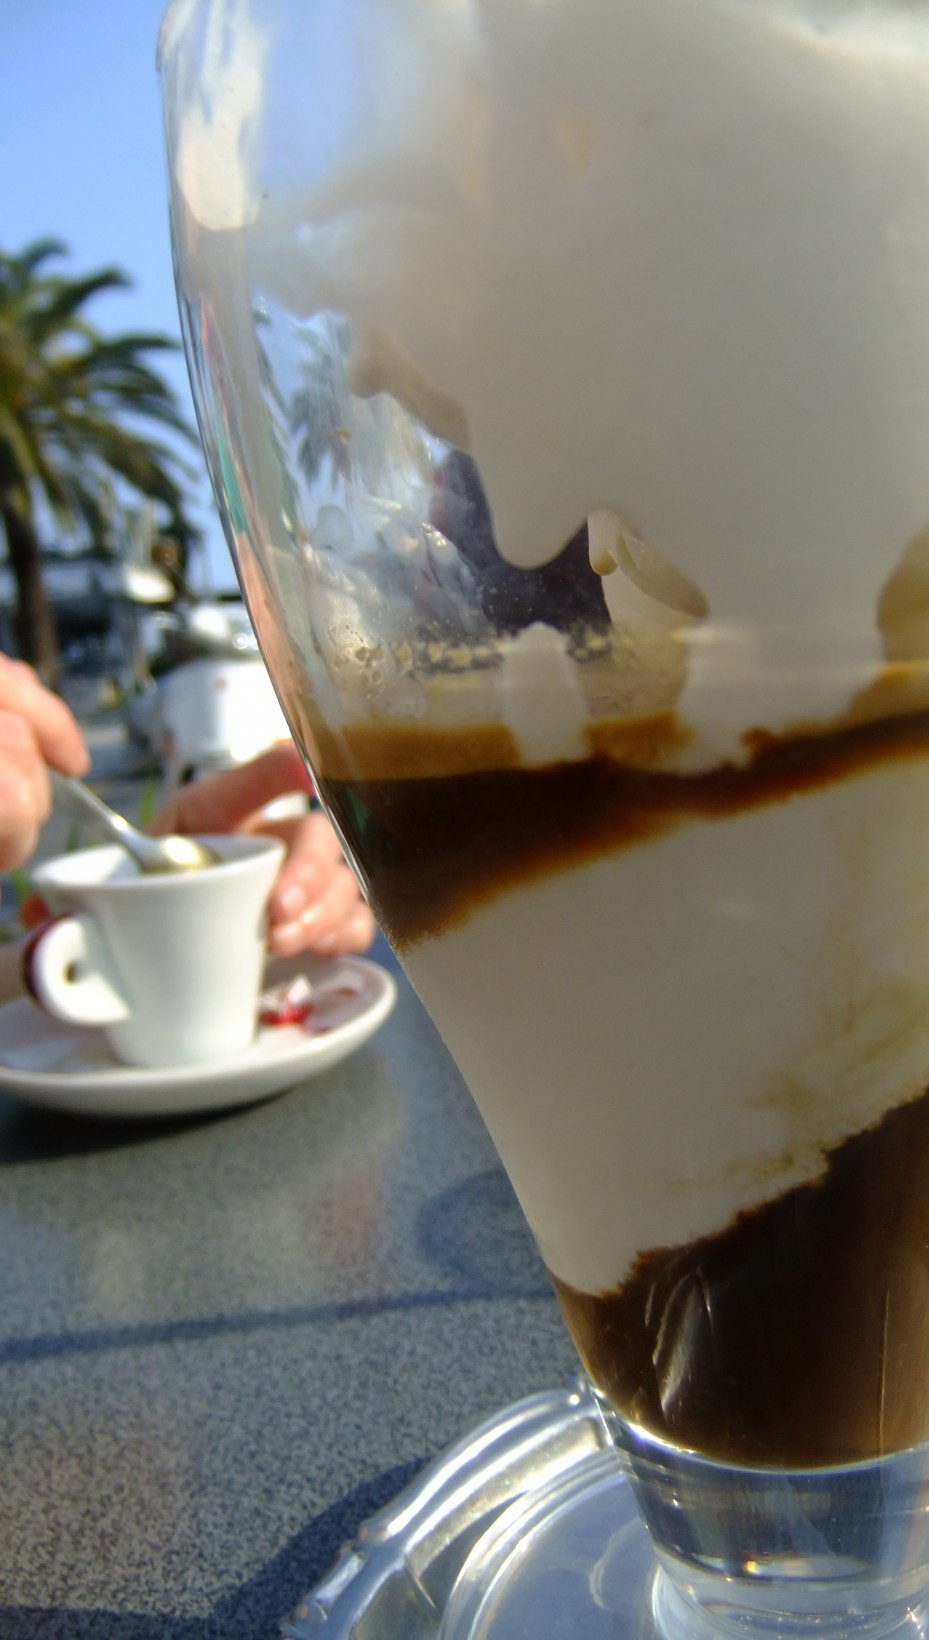 Affogato. The greatest thing on earth.